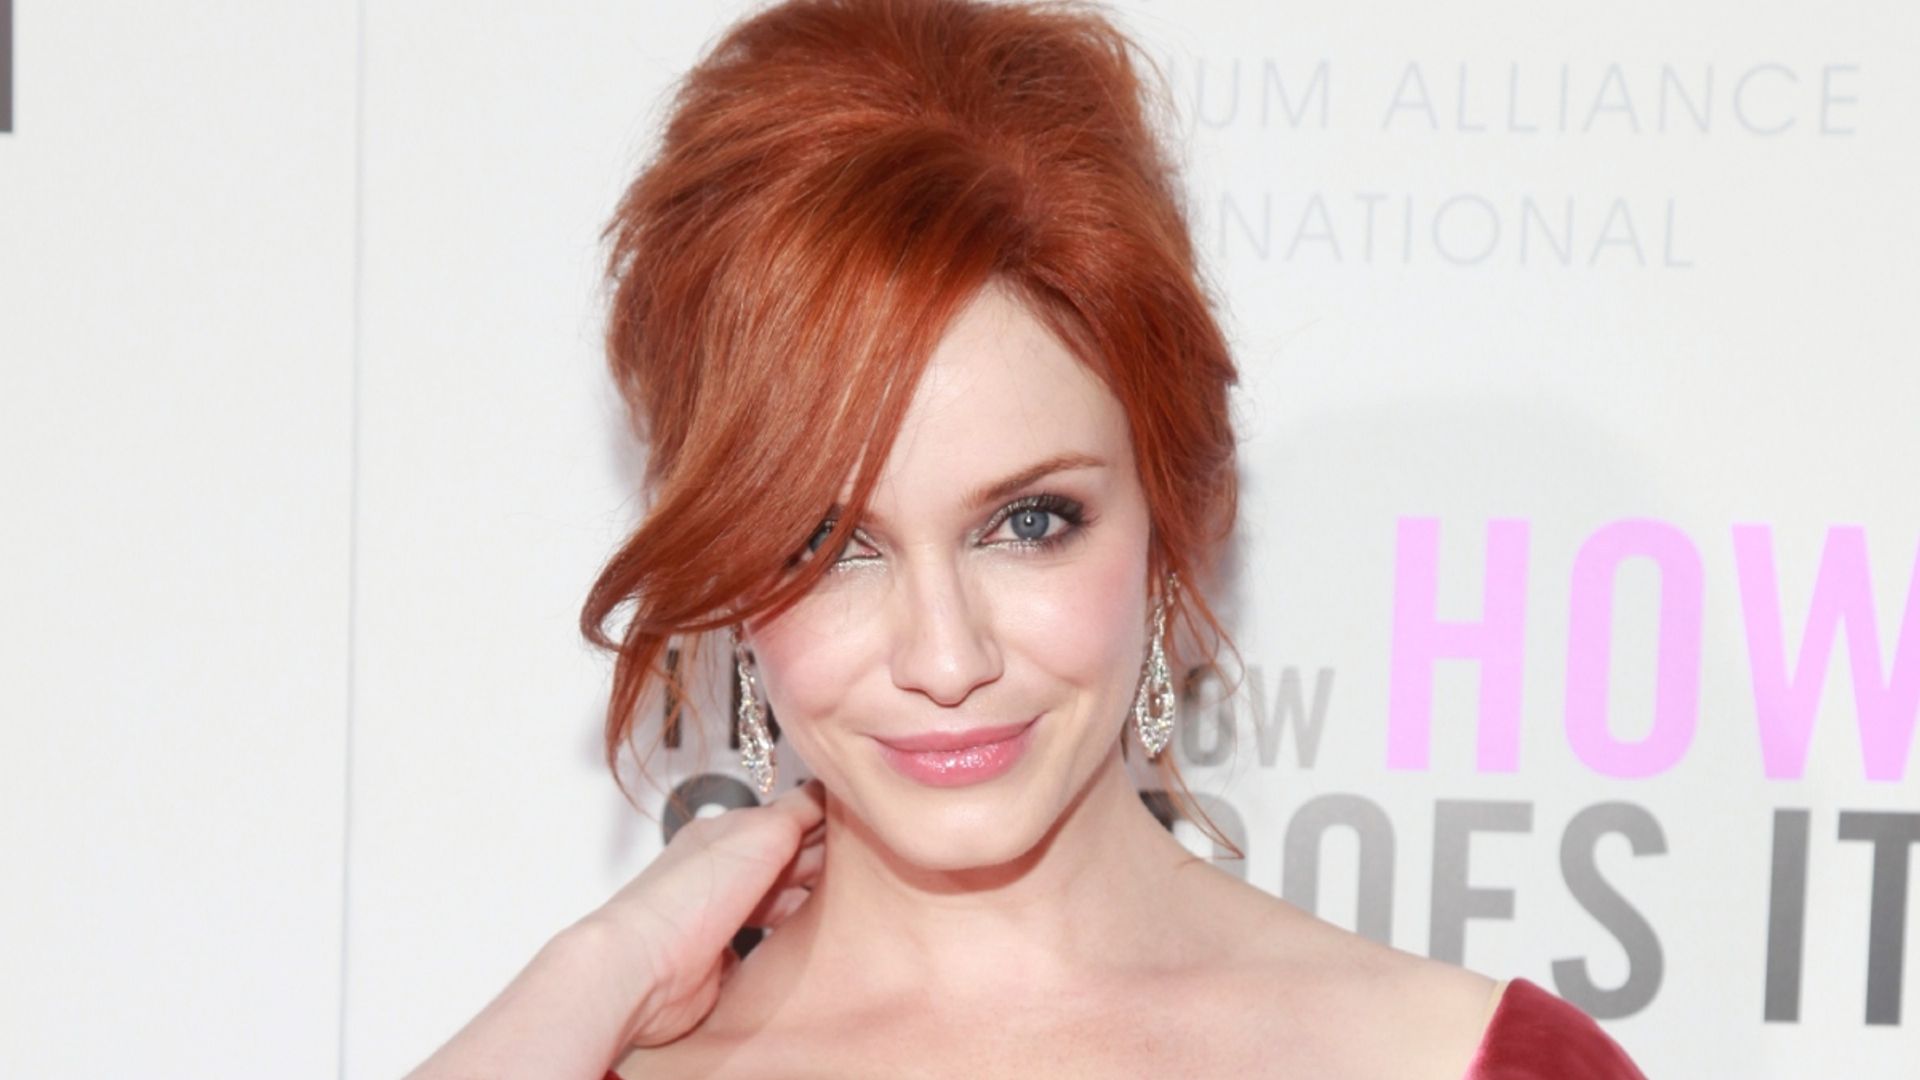 Christina Hendricks shares incredible throwback from modeling days you have to see